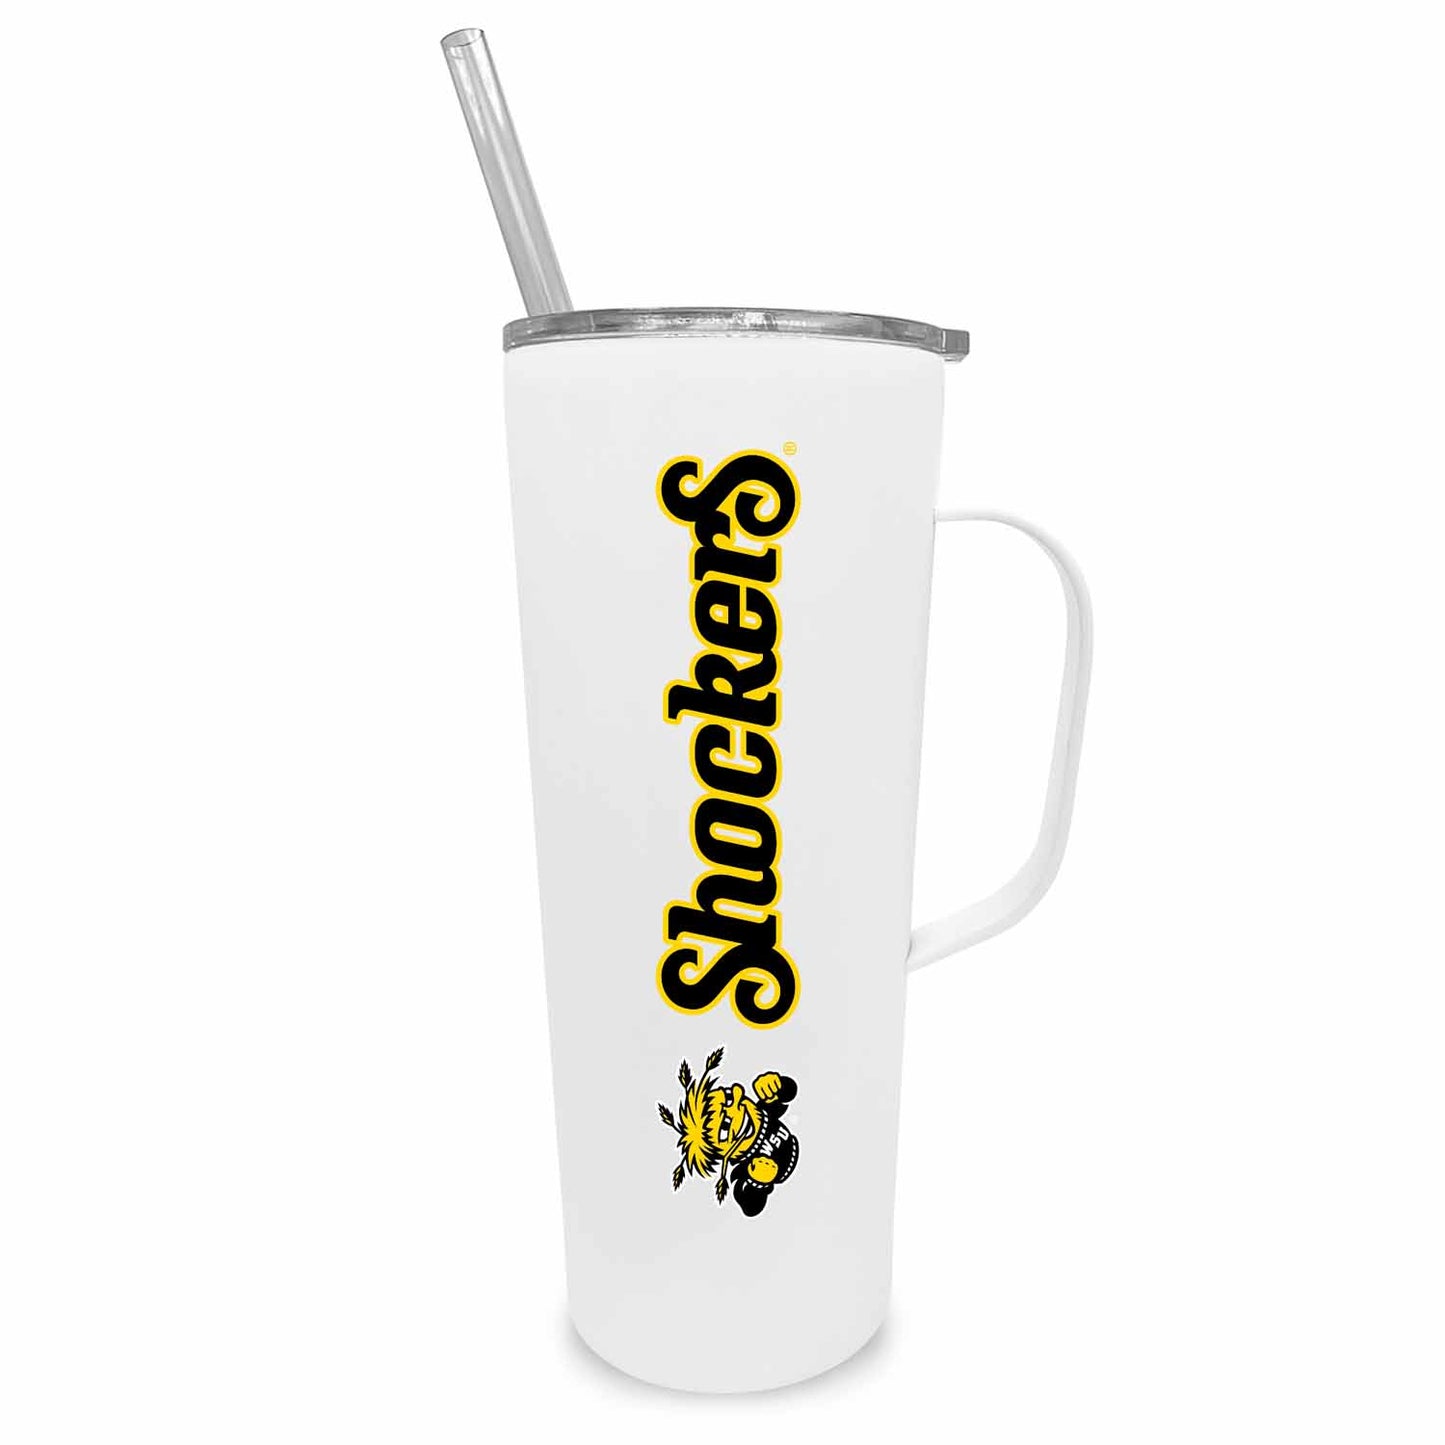 Wichita State Shockers NCAA Stainless Steal 20oz Roadie With Handle & Dual Option Lid With Straw - White